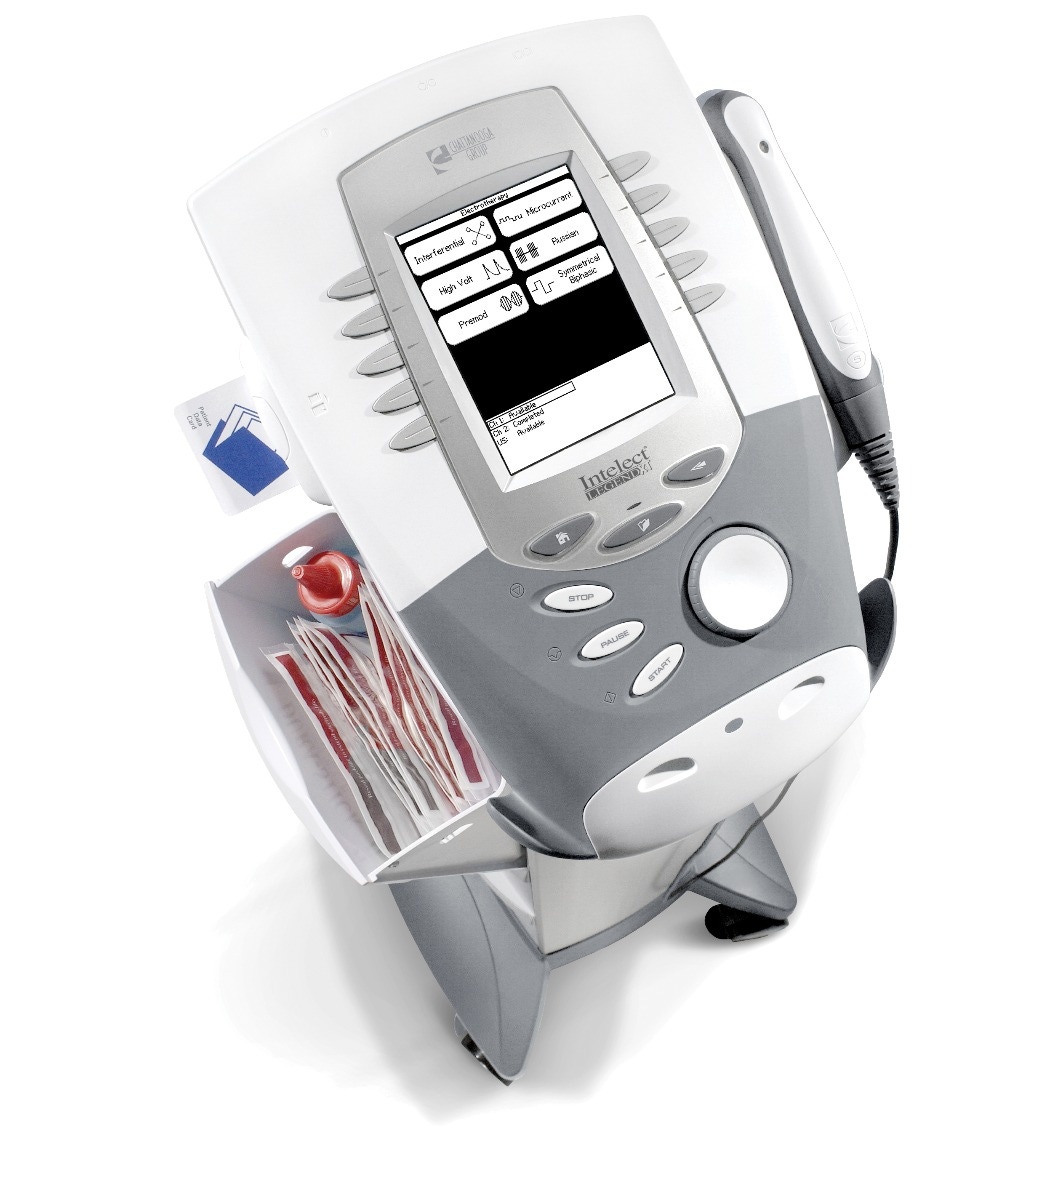 Intelect Legend XT Electrical Stimulation Machine - Chattanooga Electrotherapy